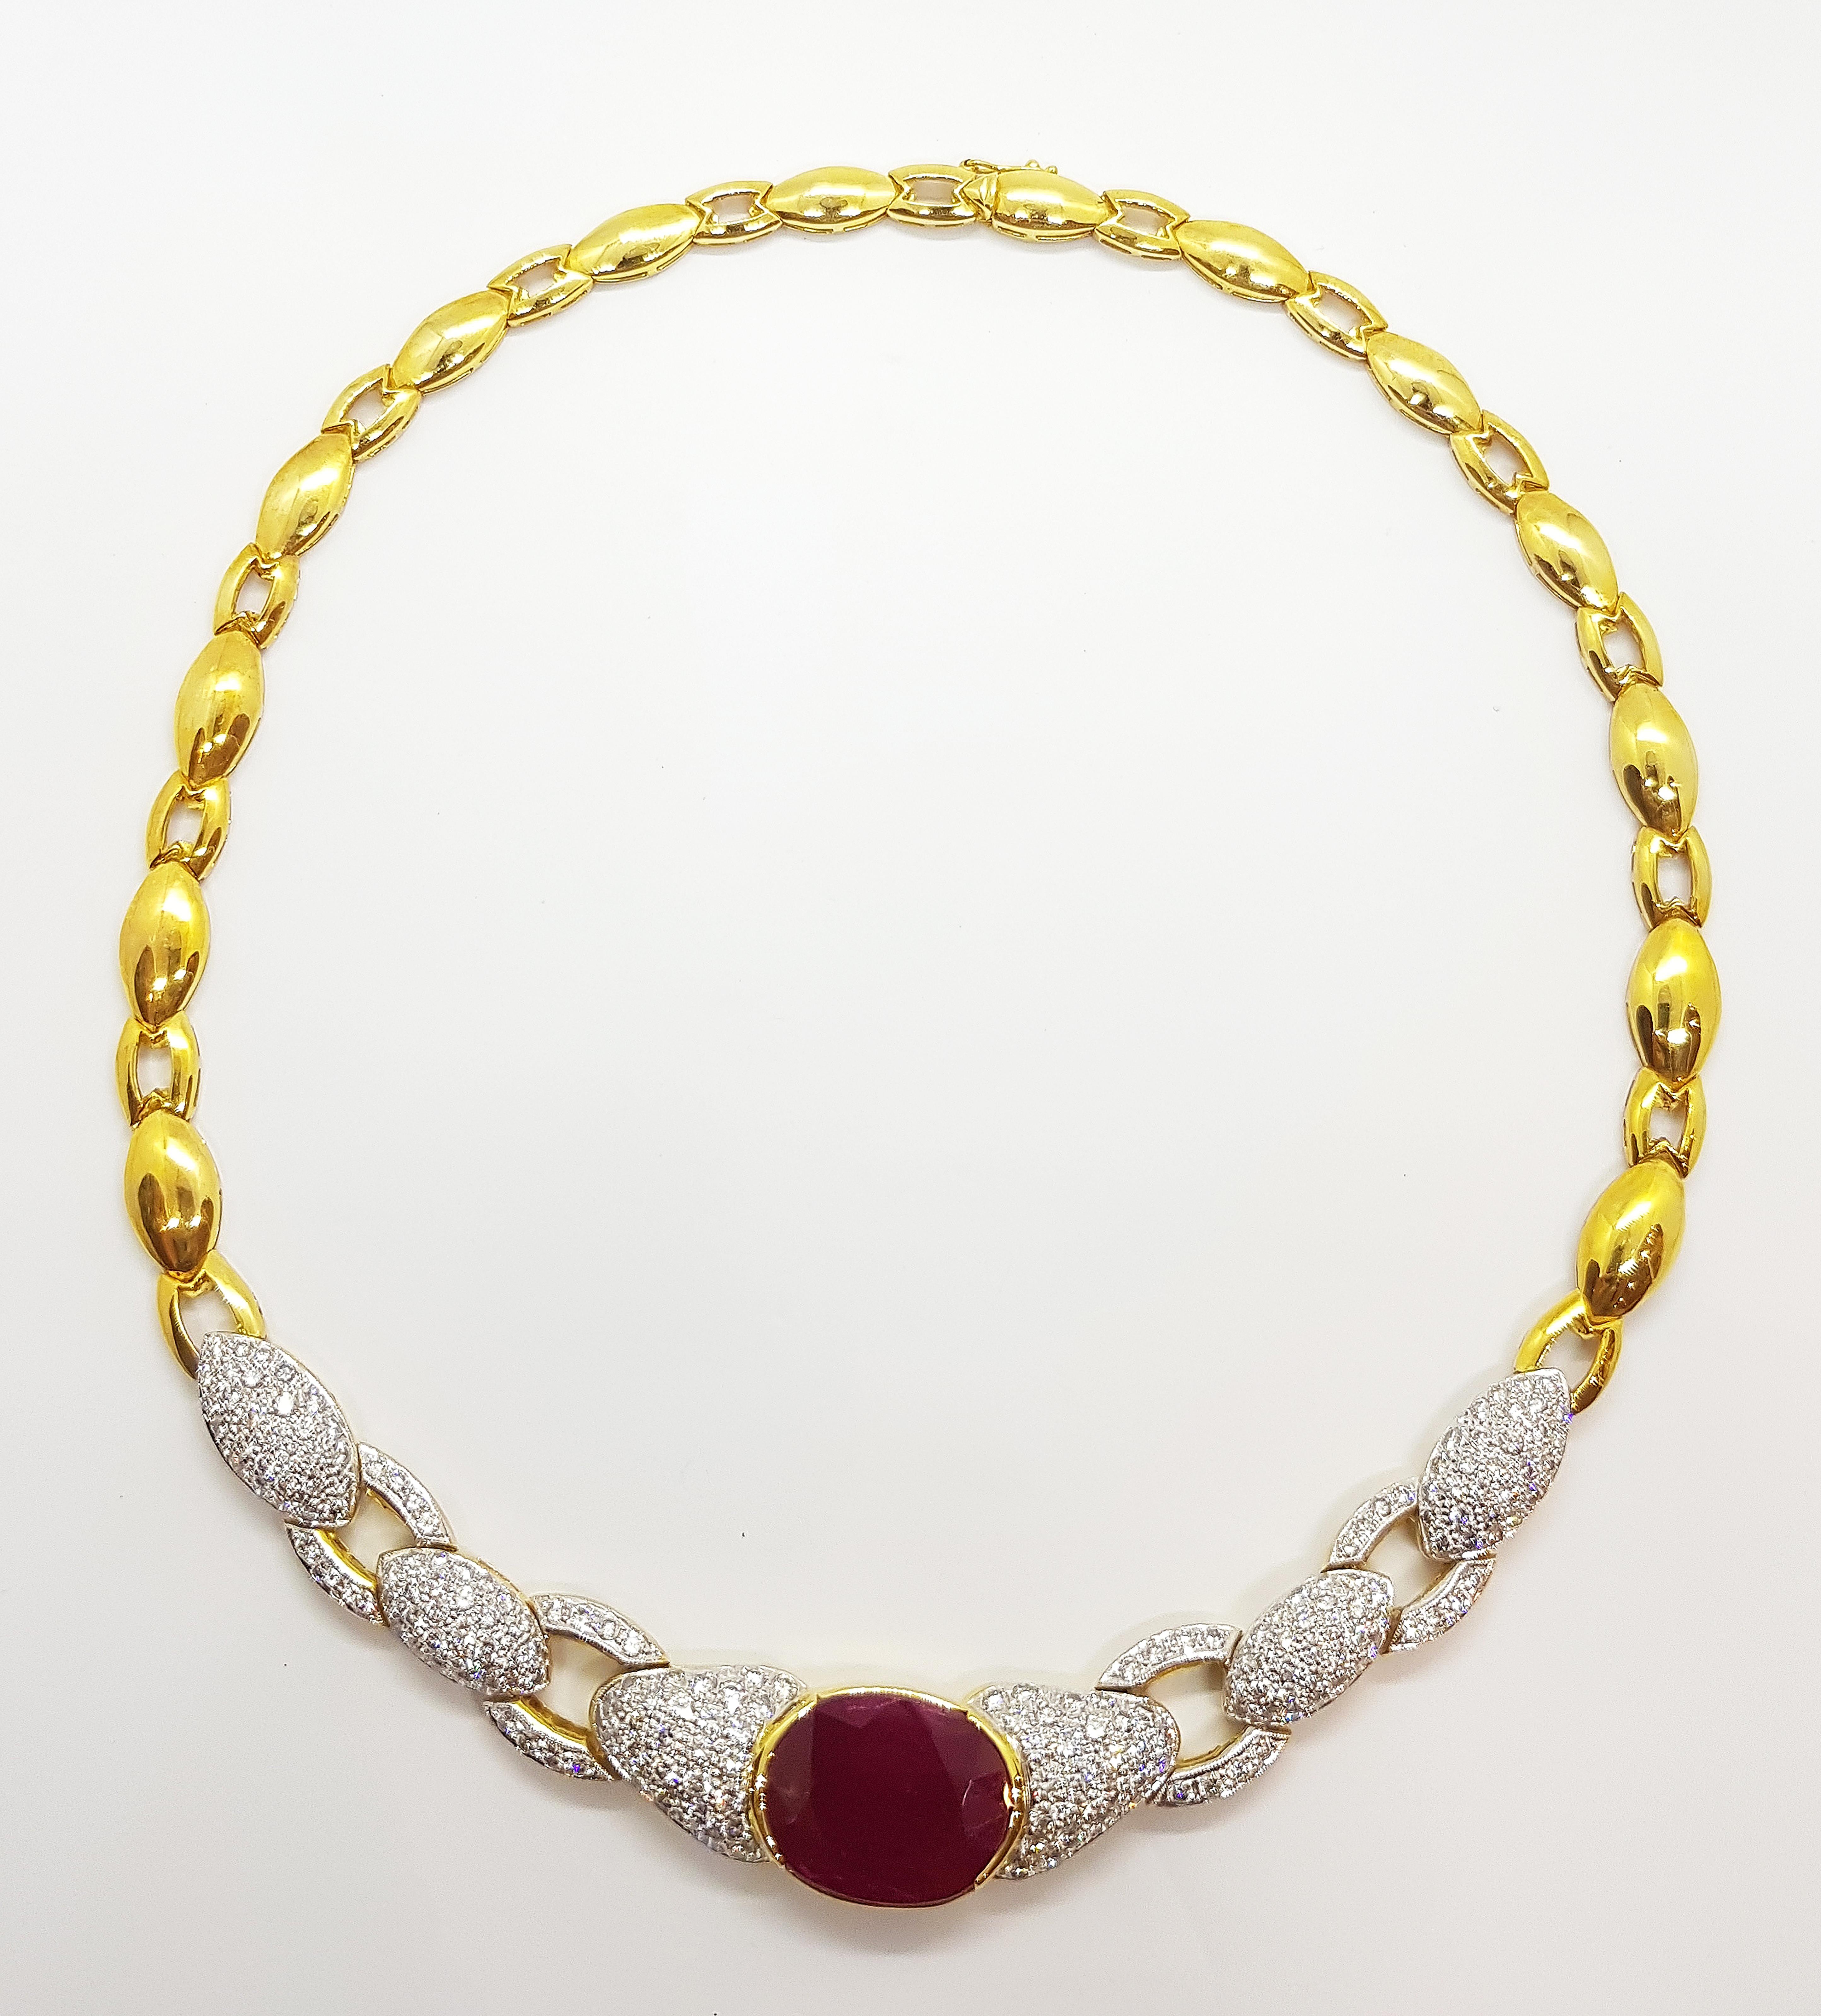 Ruby 12.57 carats with Diamond 5.83 carats Necklace set in 18 Karat Gold Settings

Width:  1.6 cm 
Length: 40.5 cm
Total Weight: 52.81 grams

